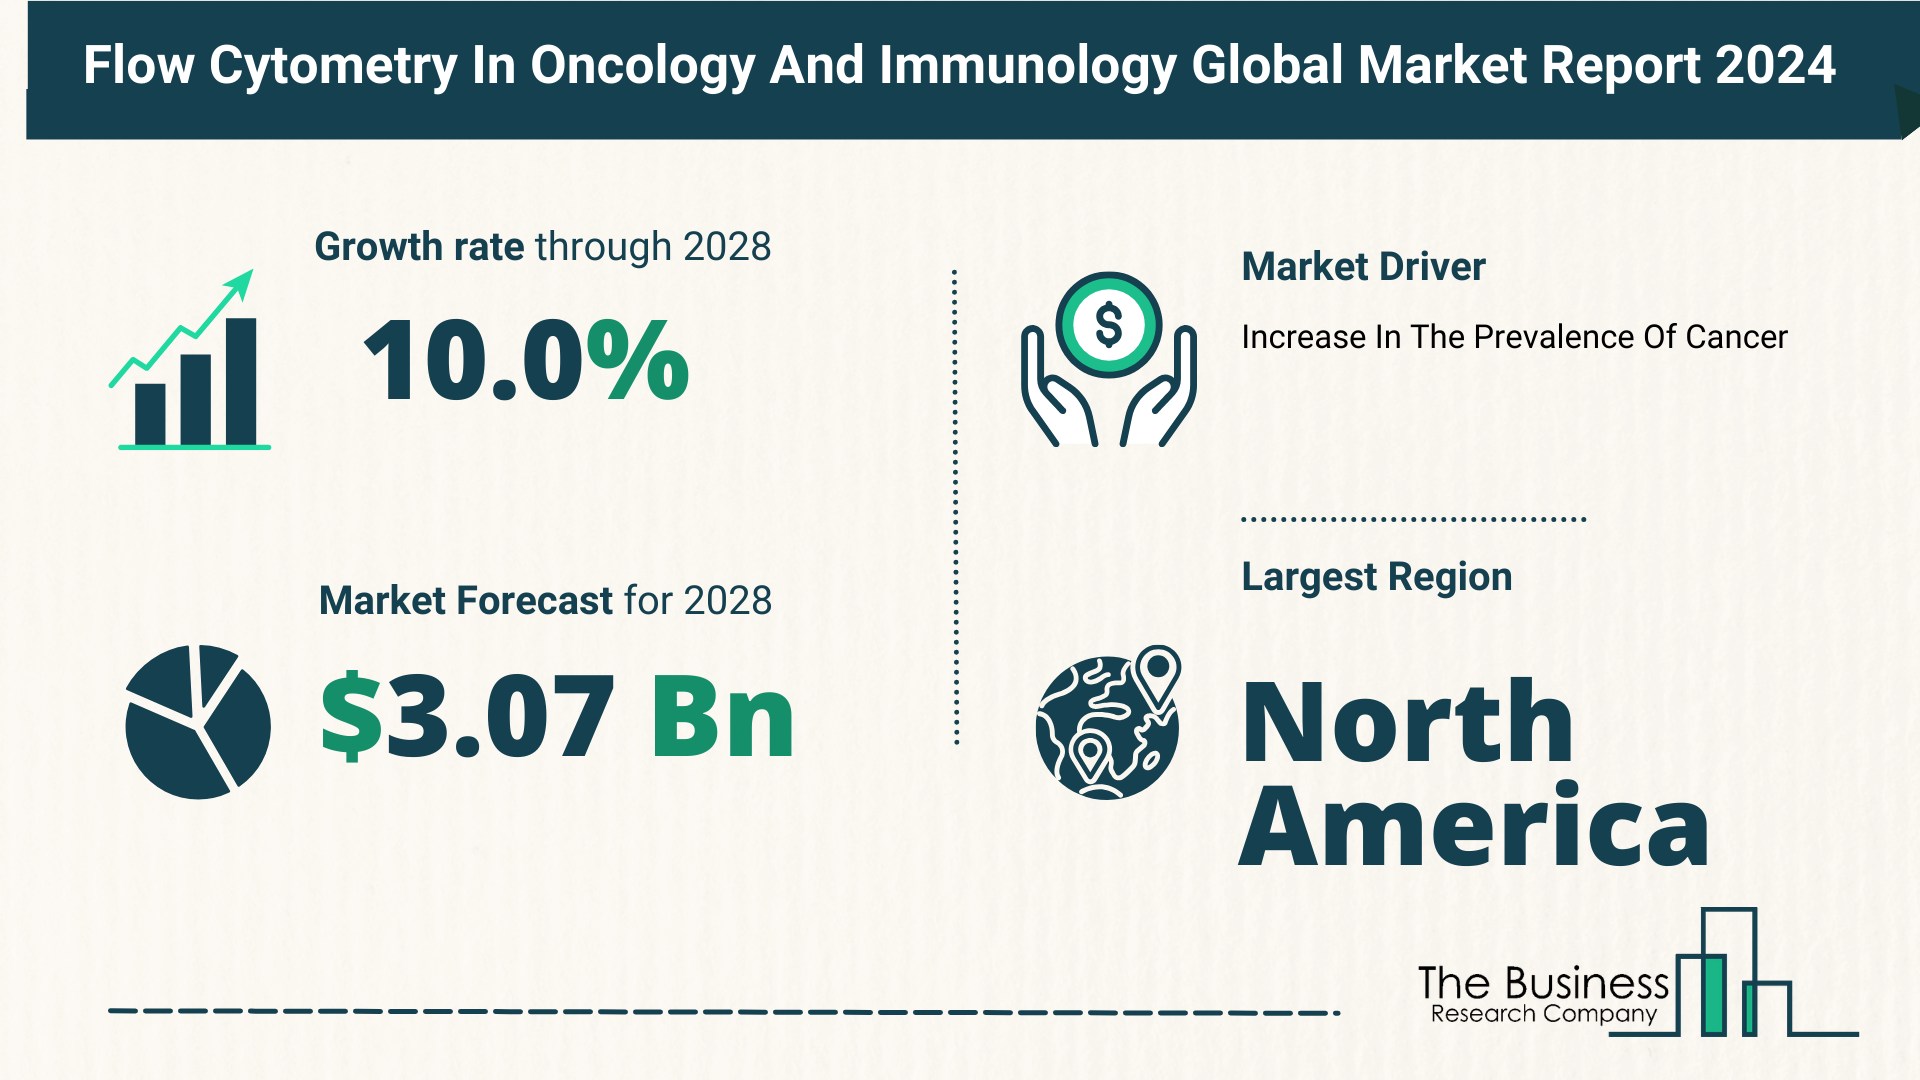 Global Flow Cytometry In Oncology And Immunology Market